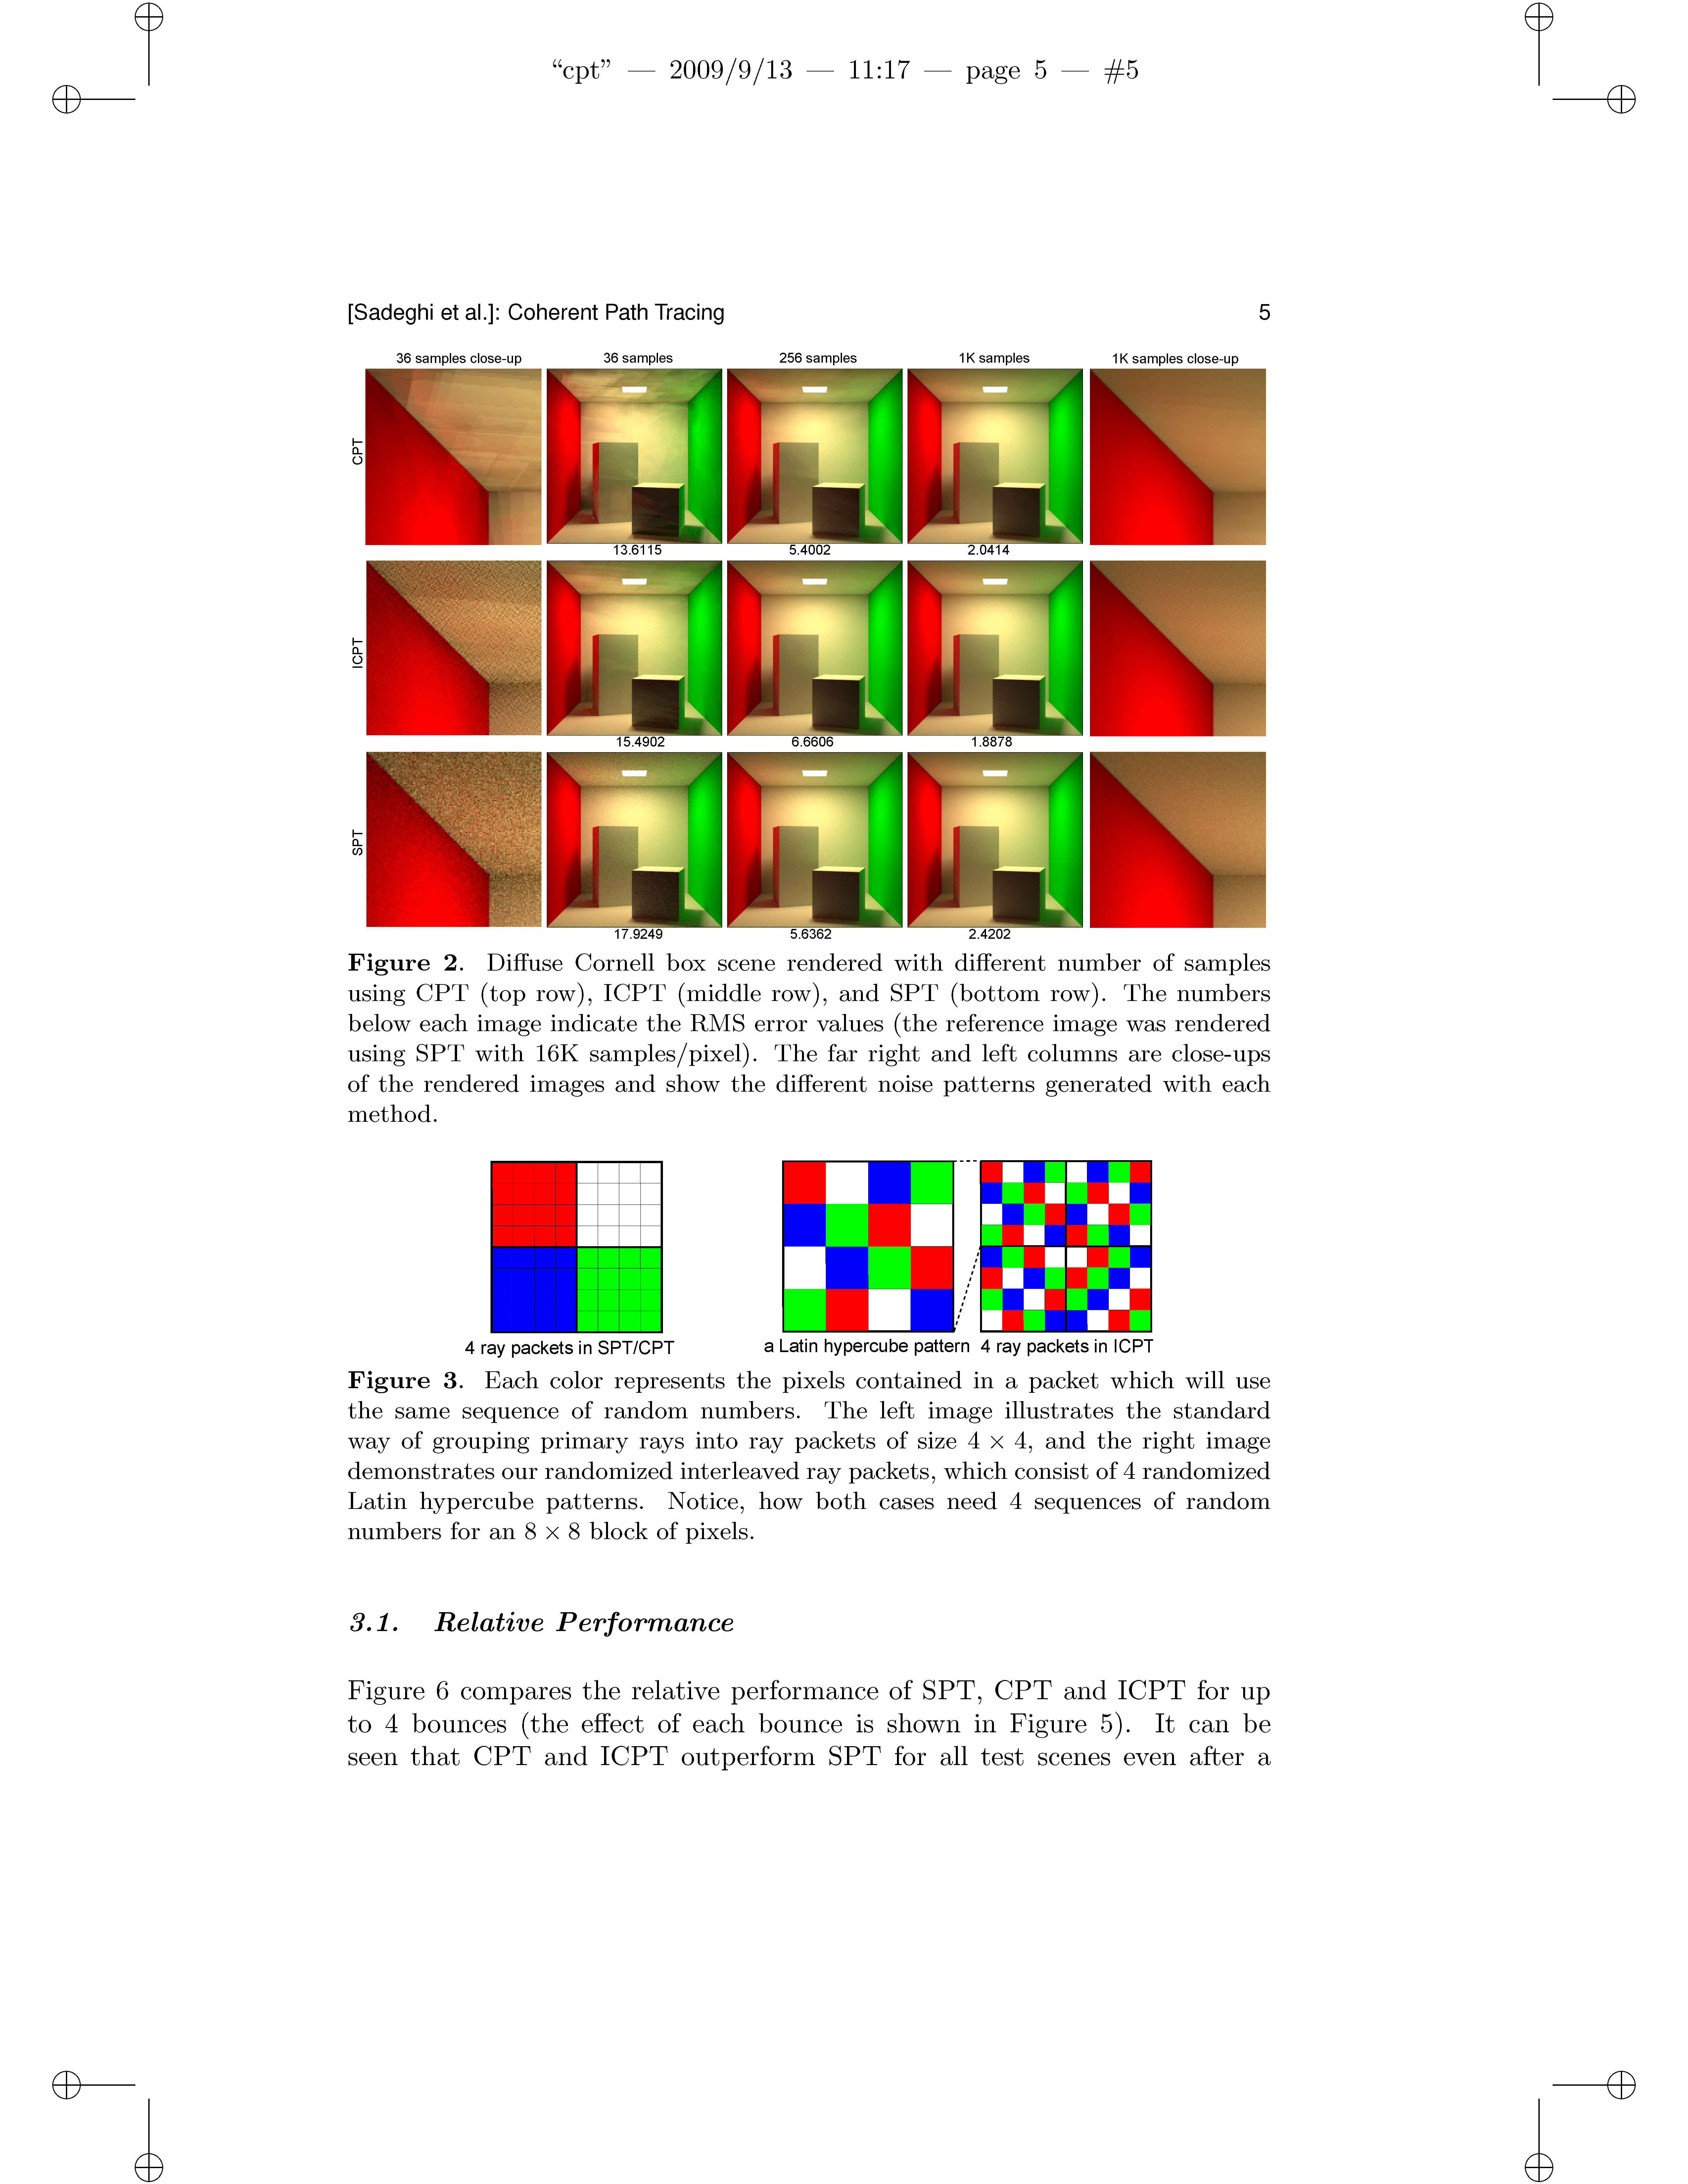 Coherent Path Tracing Page 5